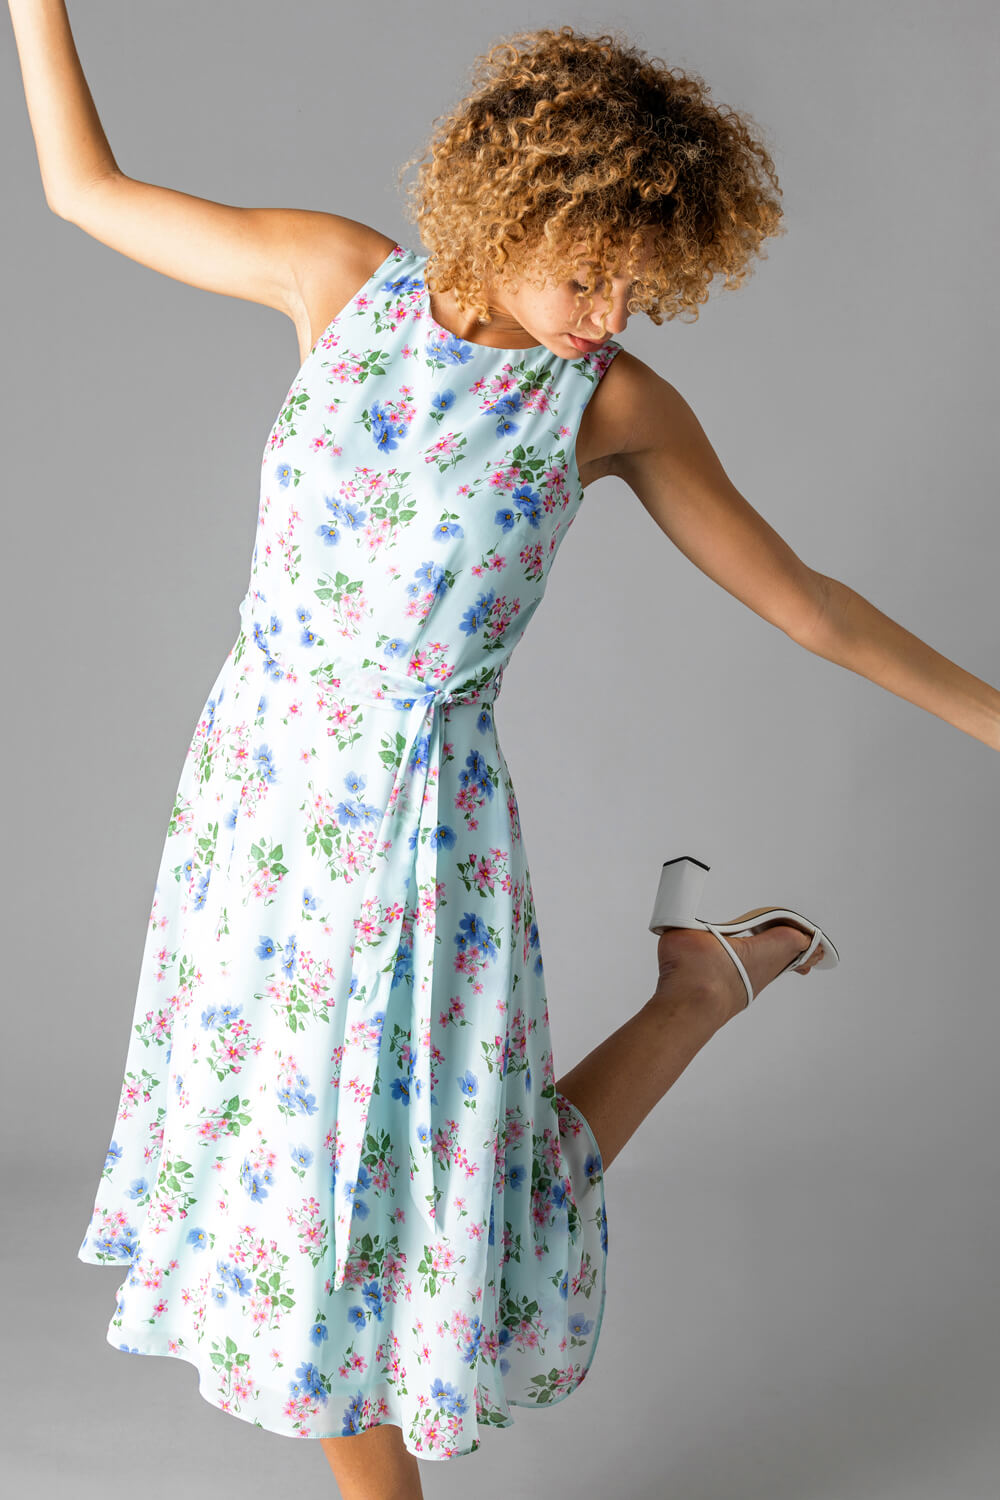 Blue Floral Fit & Flare Midi Dress, Image 3 of 4